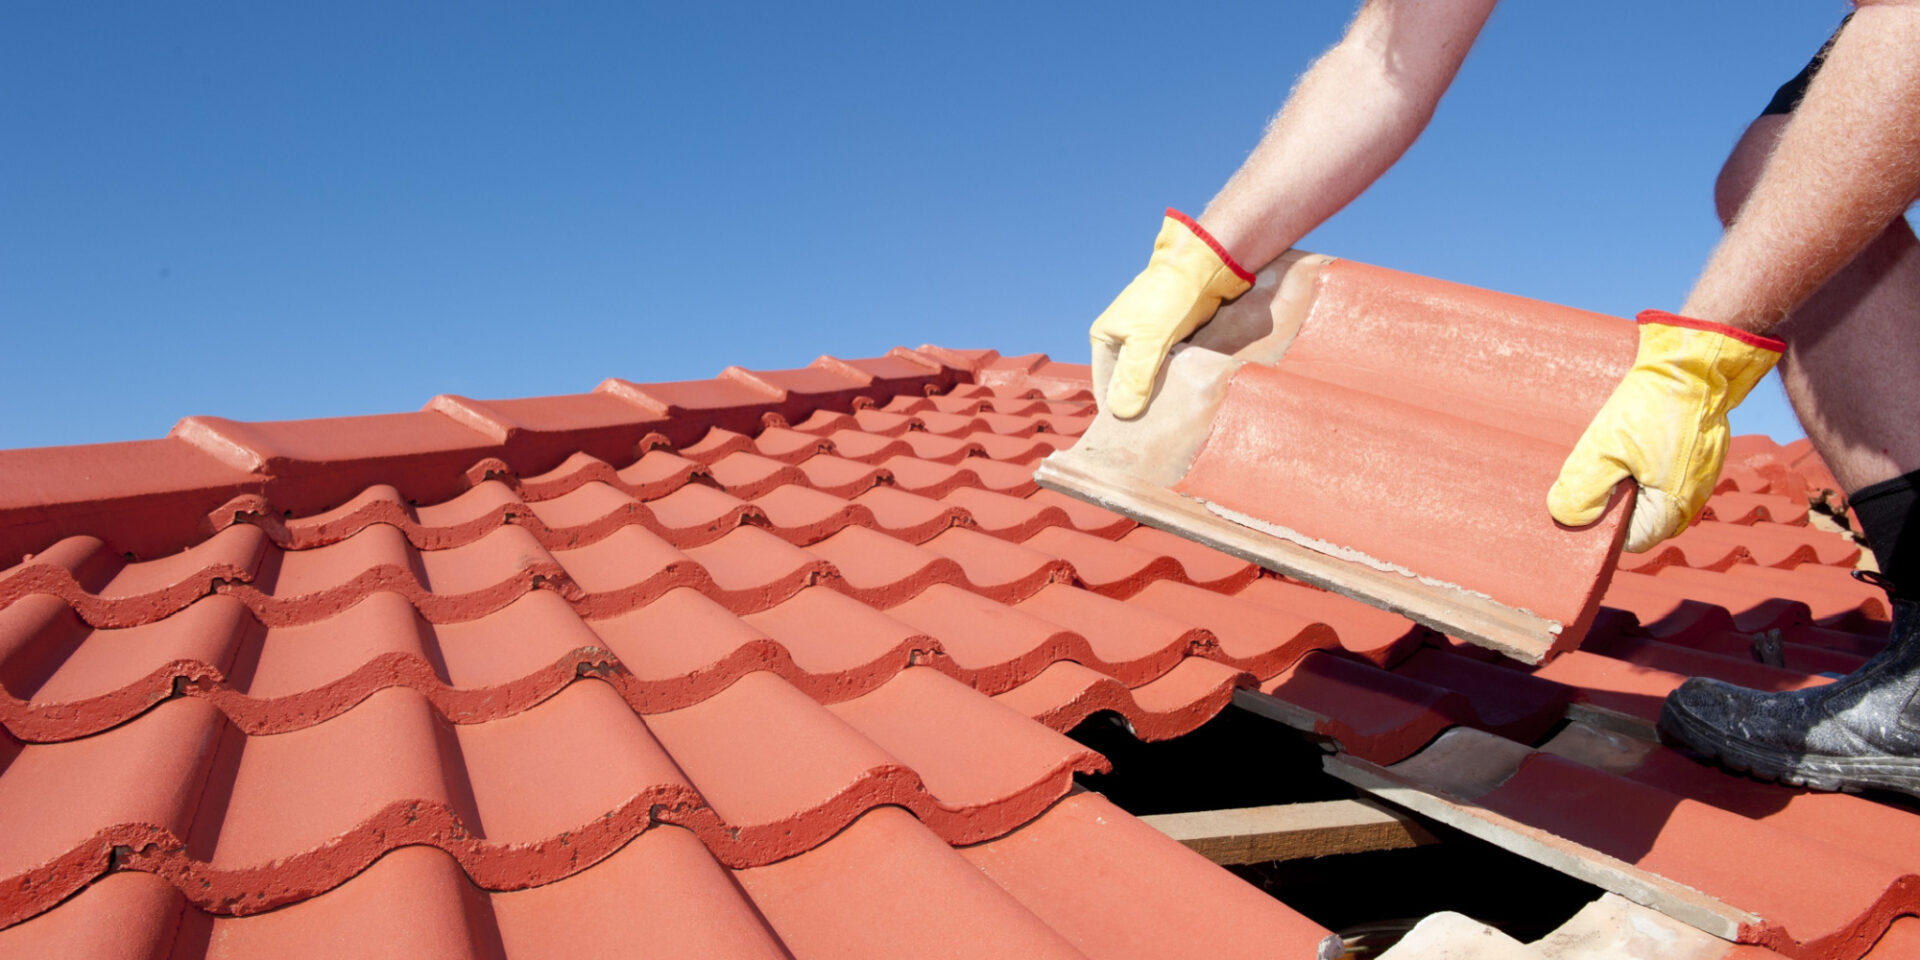 Finding Reliable Roof Repair Pros in Tampa